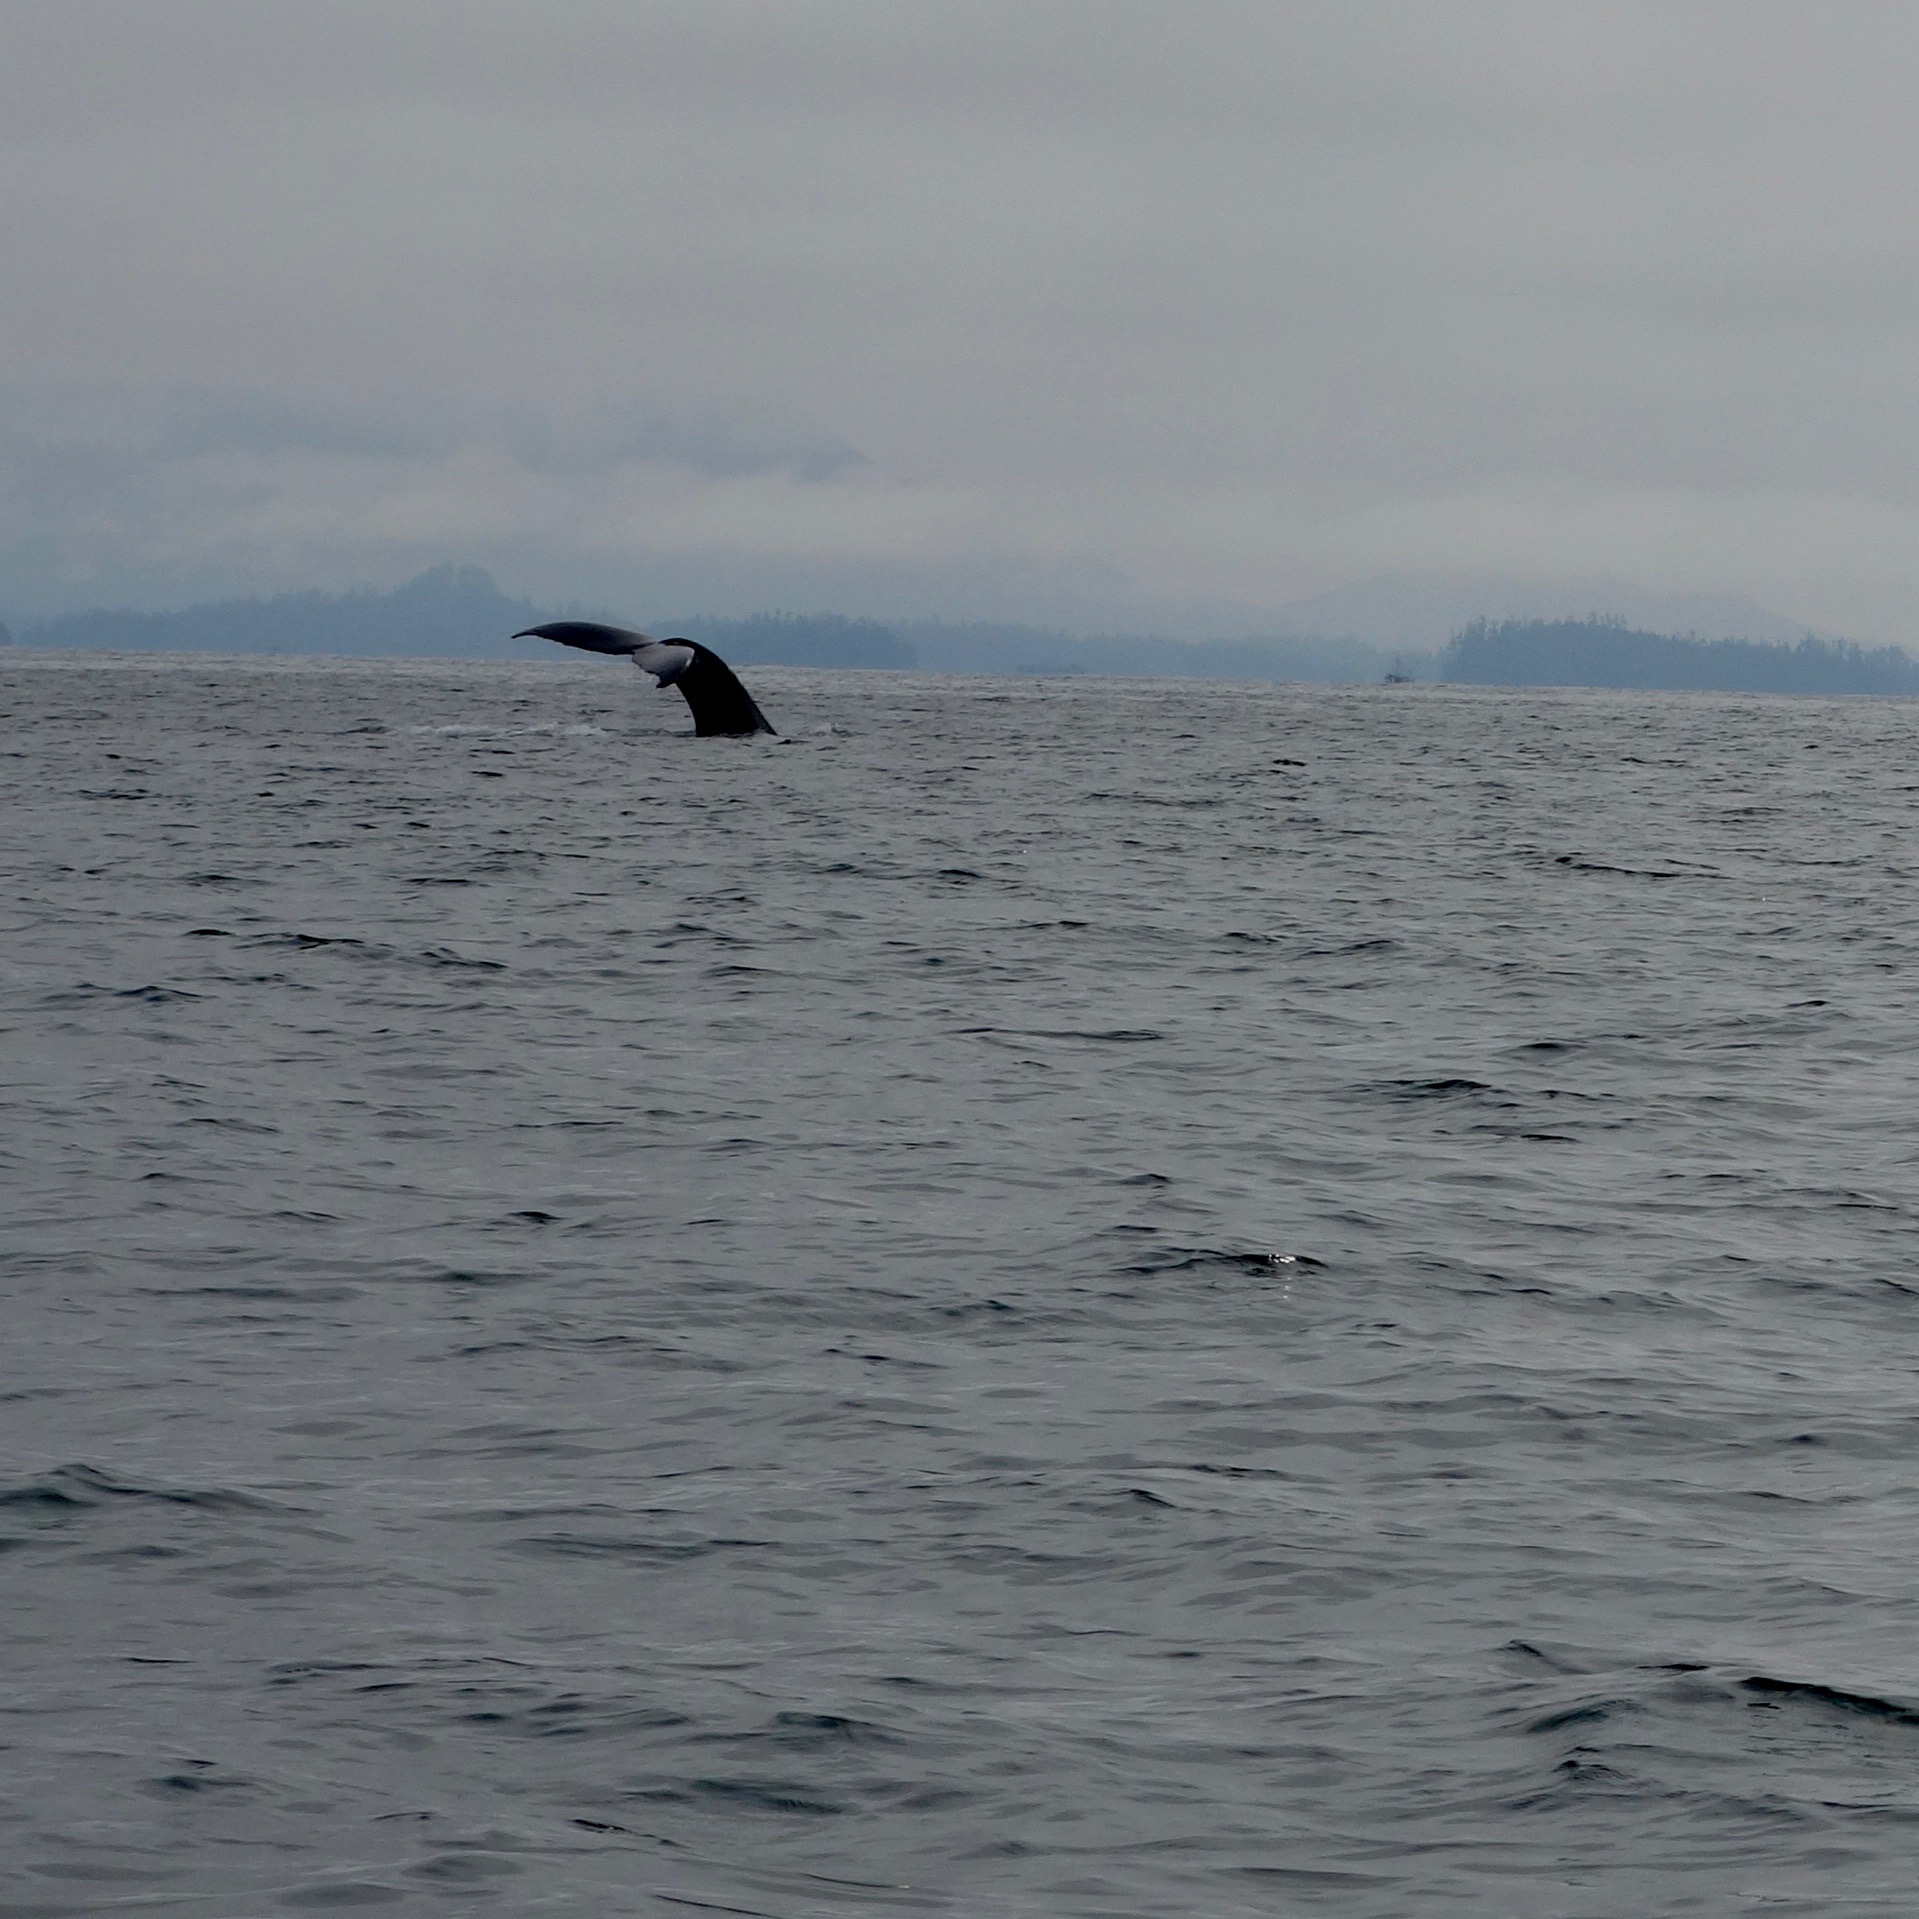 Have to click fast!  The tale of a humpback whale heading down to the bottom of the ocean to eat.  